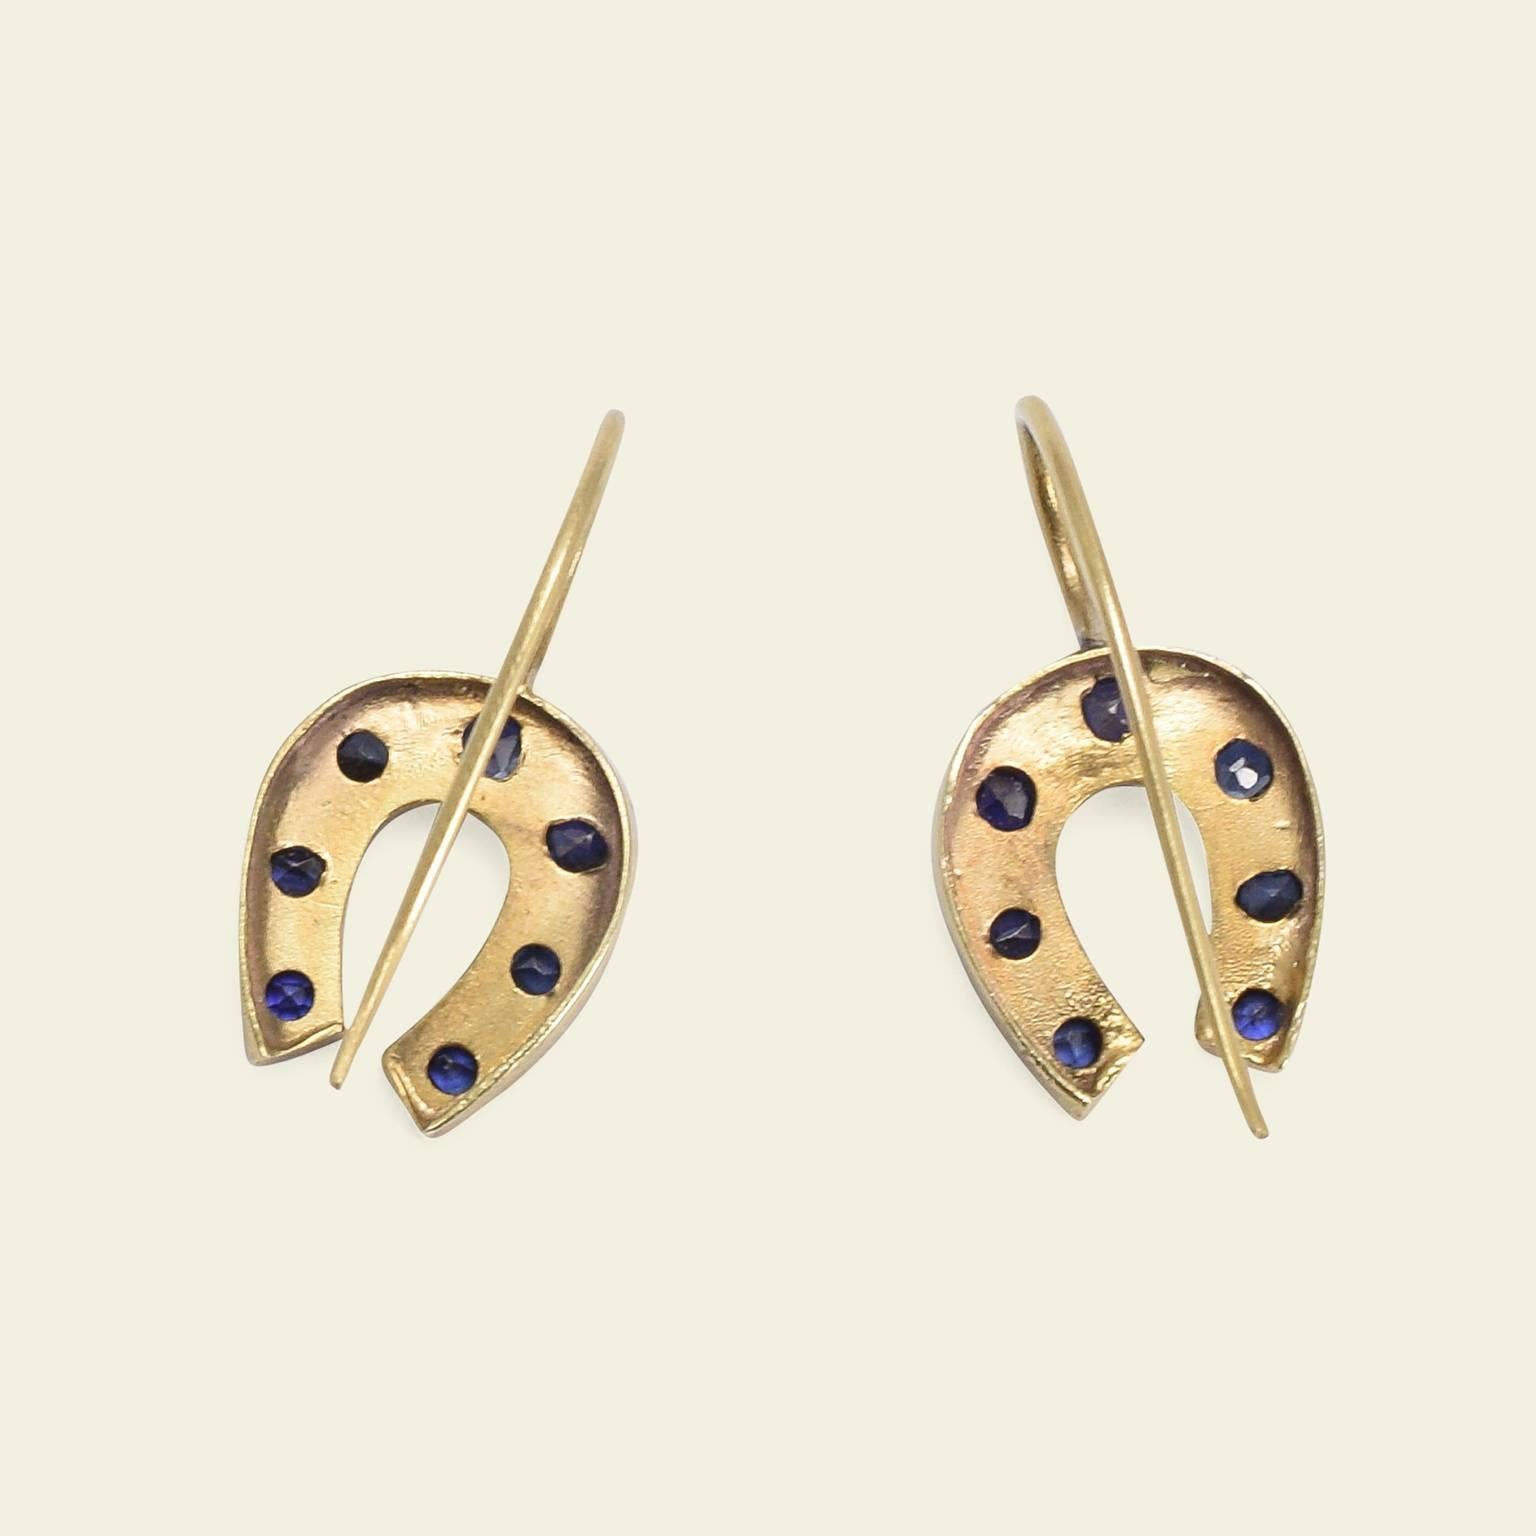 Horseshoes are widely recognized talismans of good fortune. Pointed up, they are thought to collect good luck as it pours down from the heavens. Pointed down - such as with these earrings - and good luck is thought to spill forth from the charm.